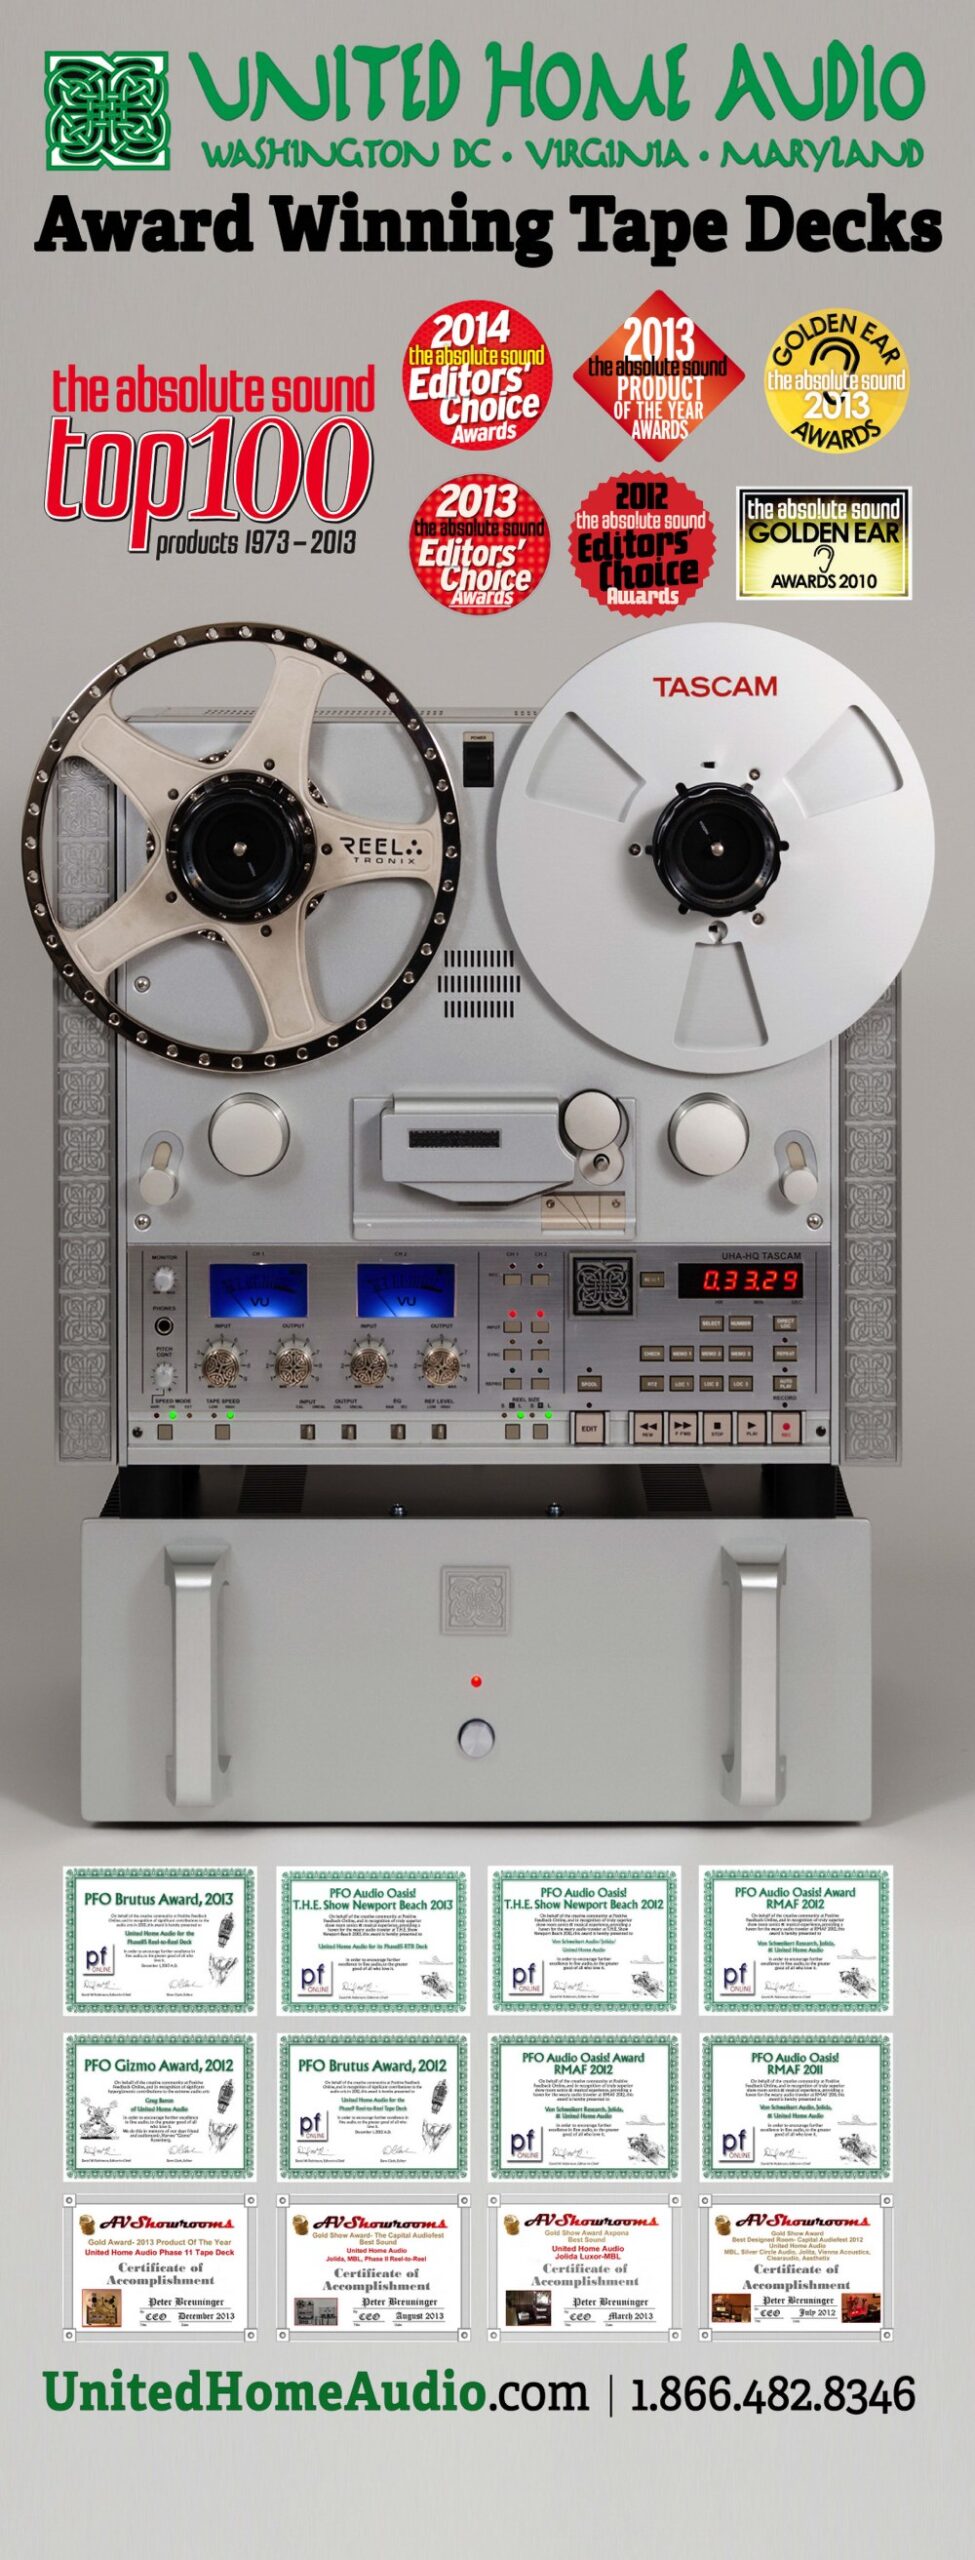 United Home Audio's New Tape Deck and Next-Gen Reel-to-Reel Tapes